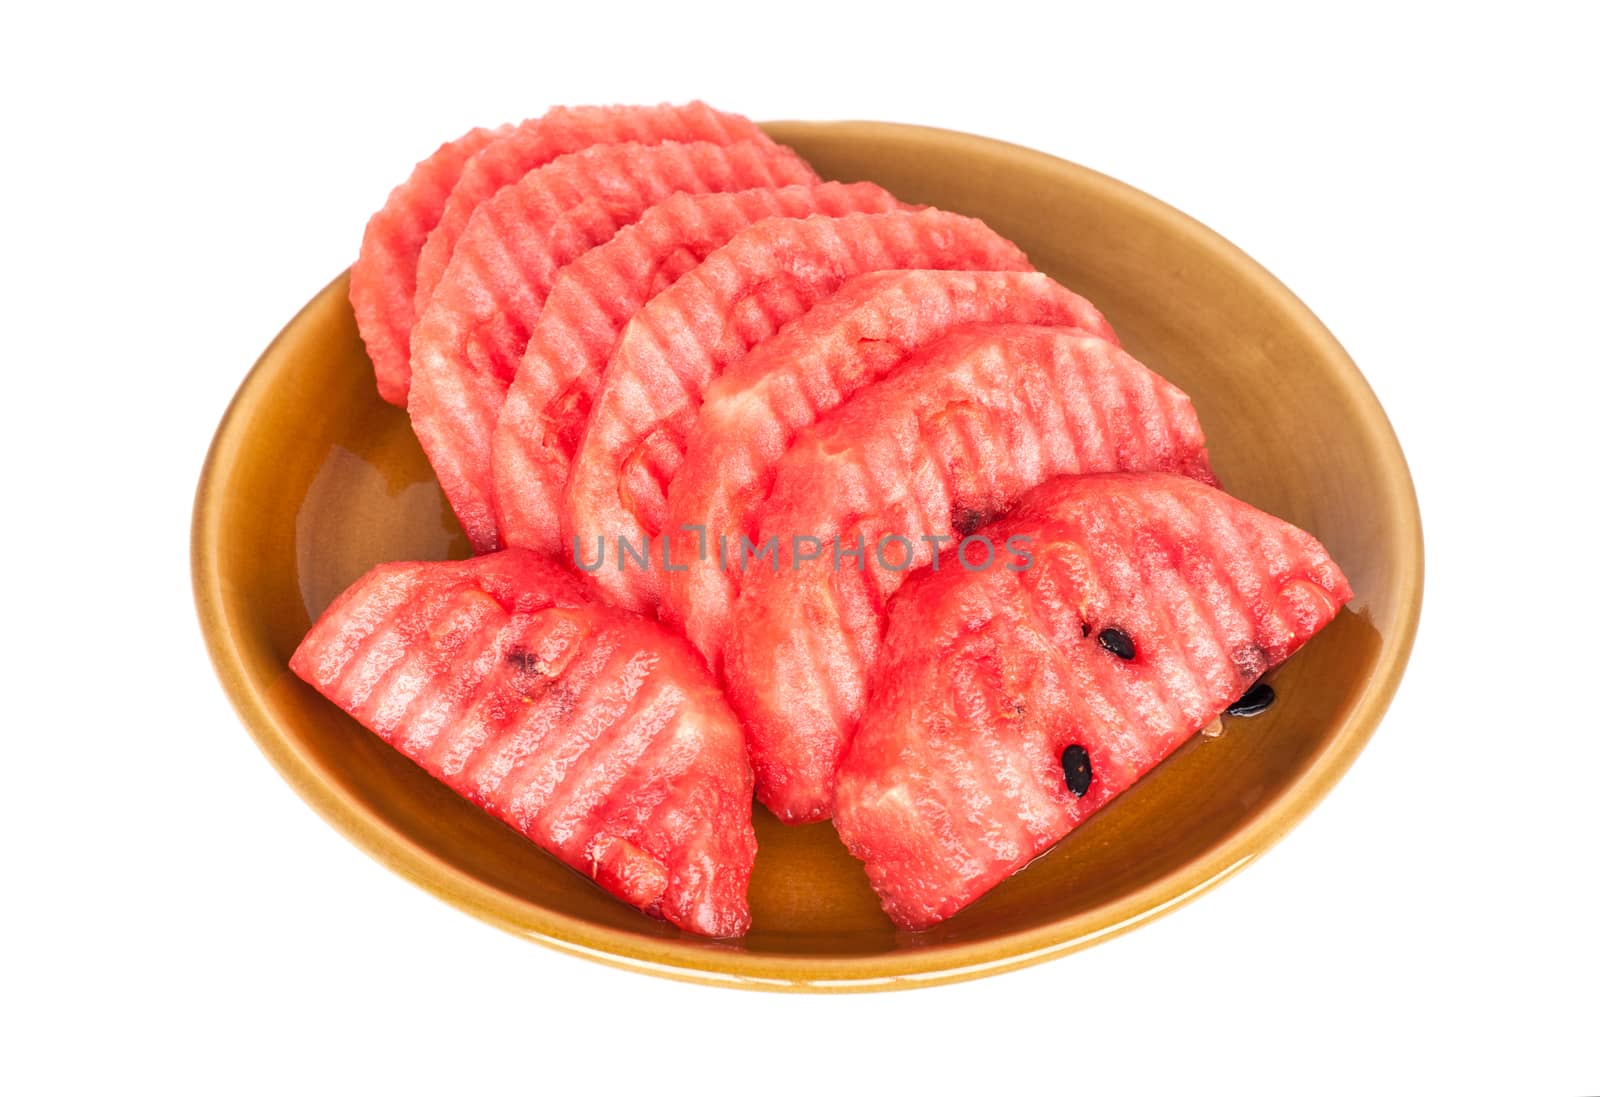 Watermelon slice in dish isolated on white background